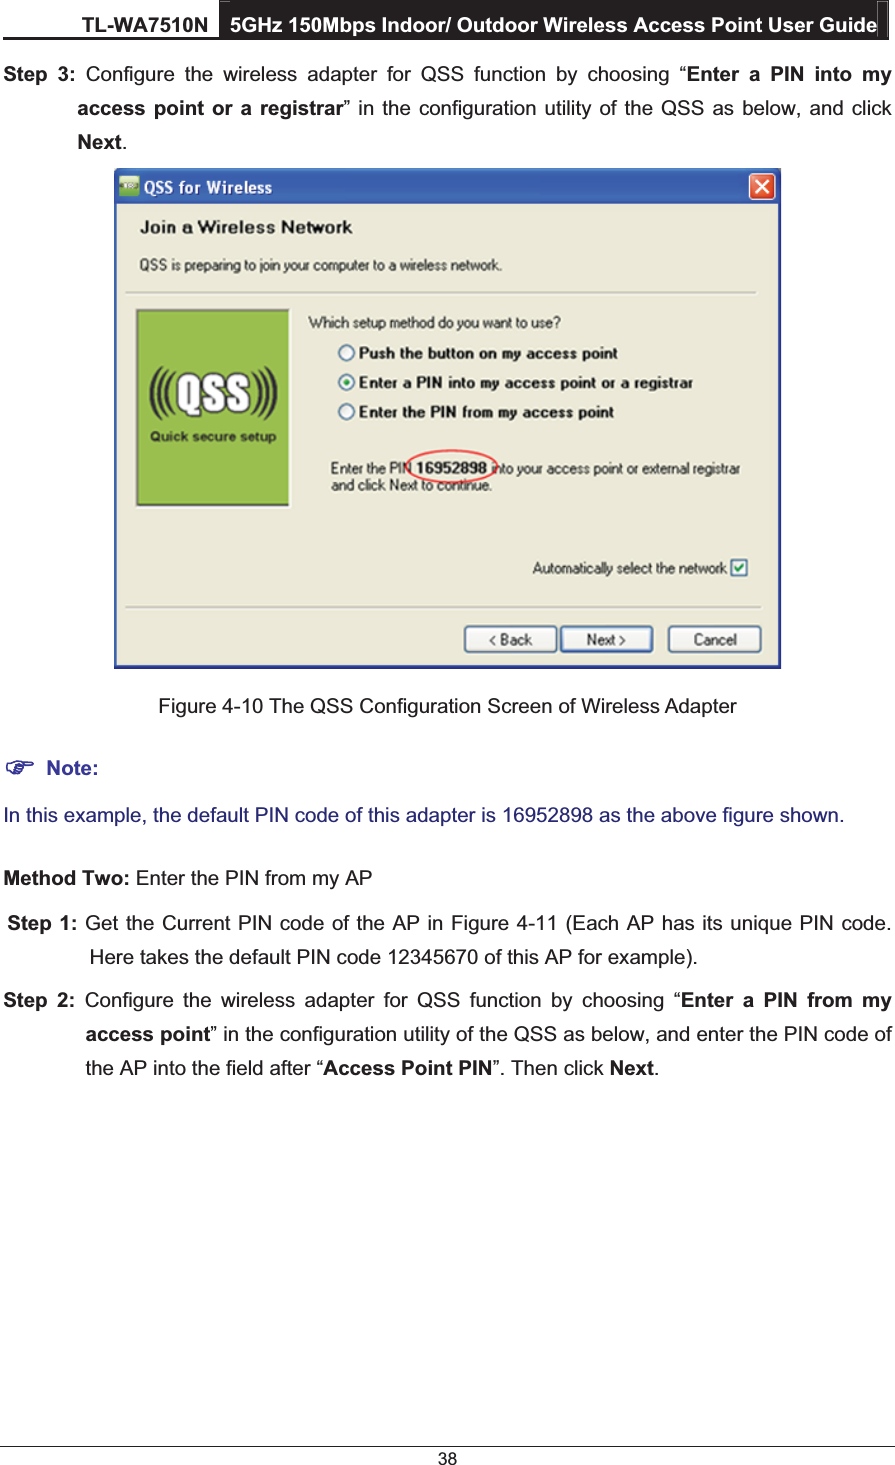 TL-WA7510N 5GHz 150Mbps Indoor/ Outdoor Wireless Access Point User Guide 38 Step 3: Configure the wireless adapter for QSS function by choosing “Enter a PIN into my   access point or a registrar” in the configuration utility of the QSS as below, and click  Next.   Figure 4-10 The QSS Configuration Screen of Wireless Adapter ) Note: In this example, the default PIN code of this adapter is 16952898 as the above figure shown. Method Two: Enter the PIN from my AP Step 1: Get the Current PIN code of the AP in Figure 4-11 (Each AP has its unique PIN code.  Here takes the default PIN code 12345670 of this AP for example). Step 2: Configure the wireless adapter for QSS function by choosing “Enter a PIN from my  access point” in the configuration utility of the QSS as below, and enter the PIN code of   the AP into the field after “Access Point PIN”. Then click Next. 